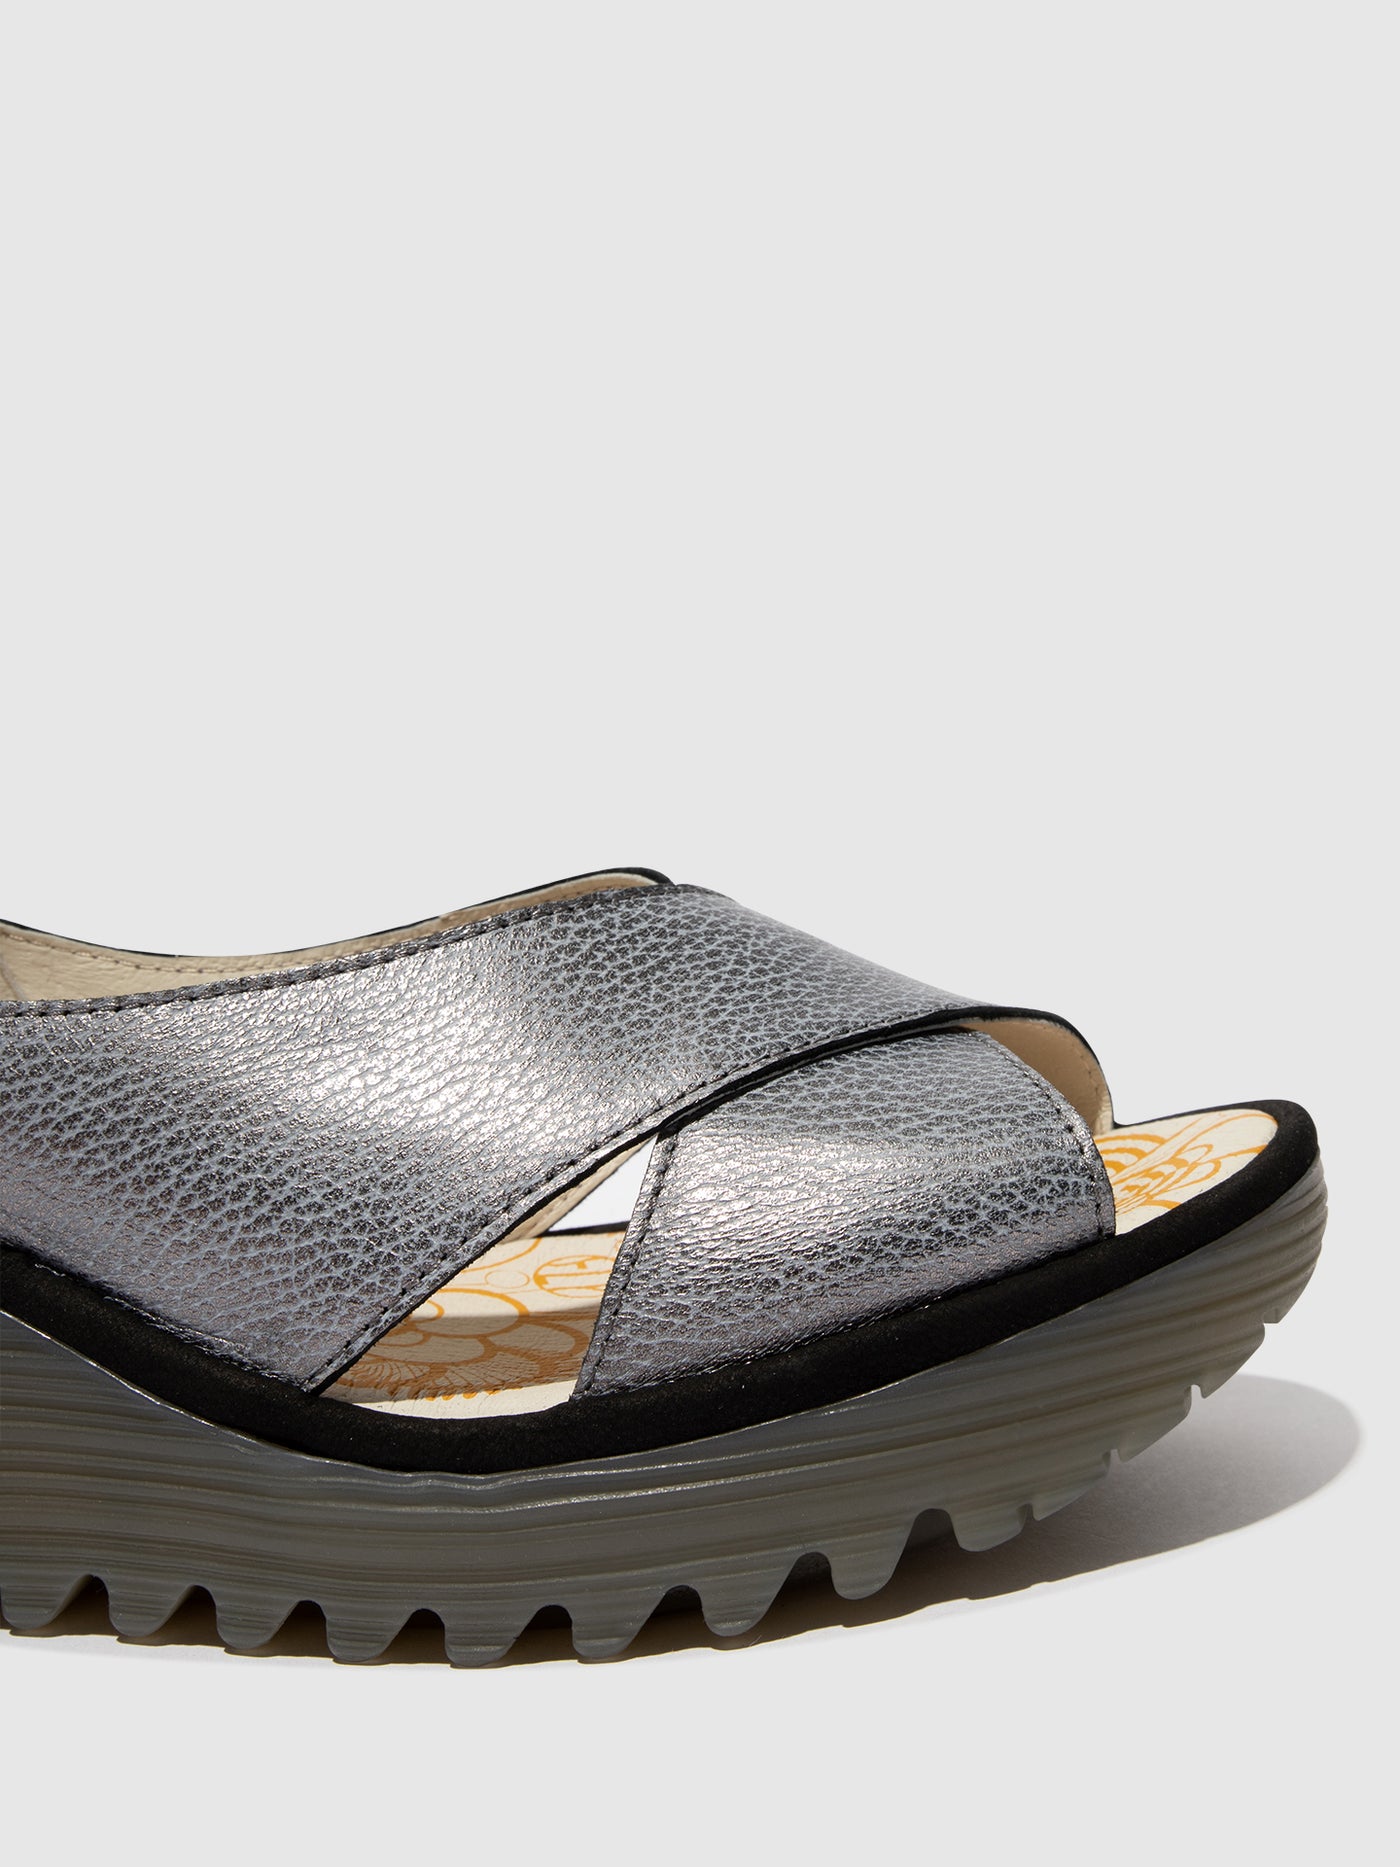 Crossover Sandals YOMA307FLY GREY/BLACK